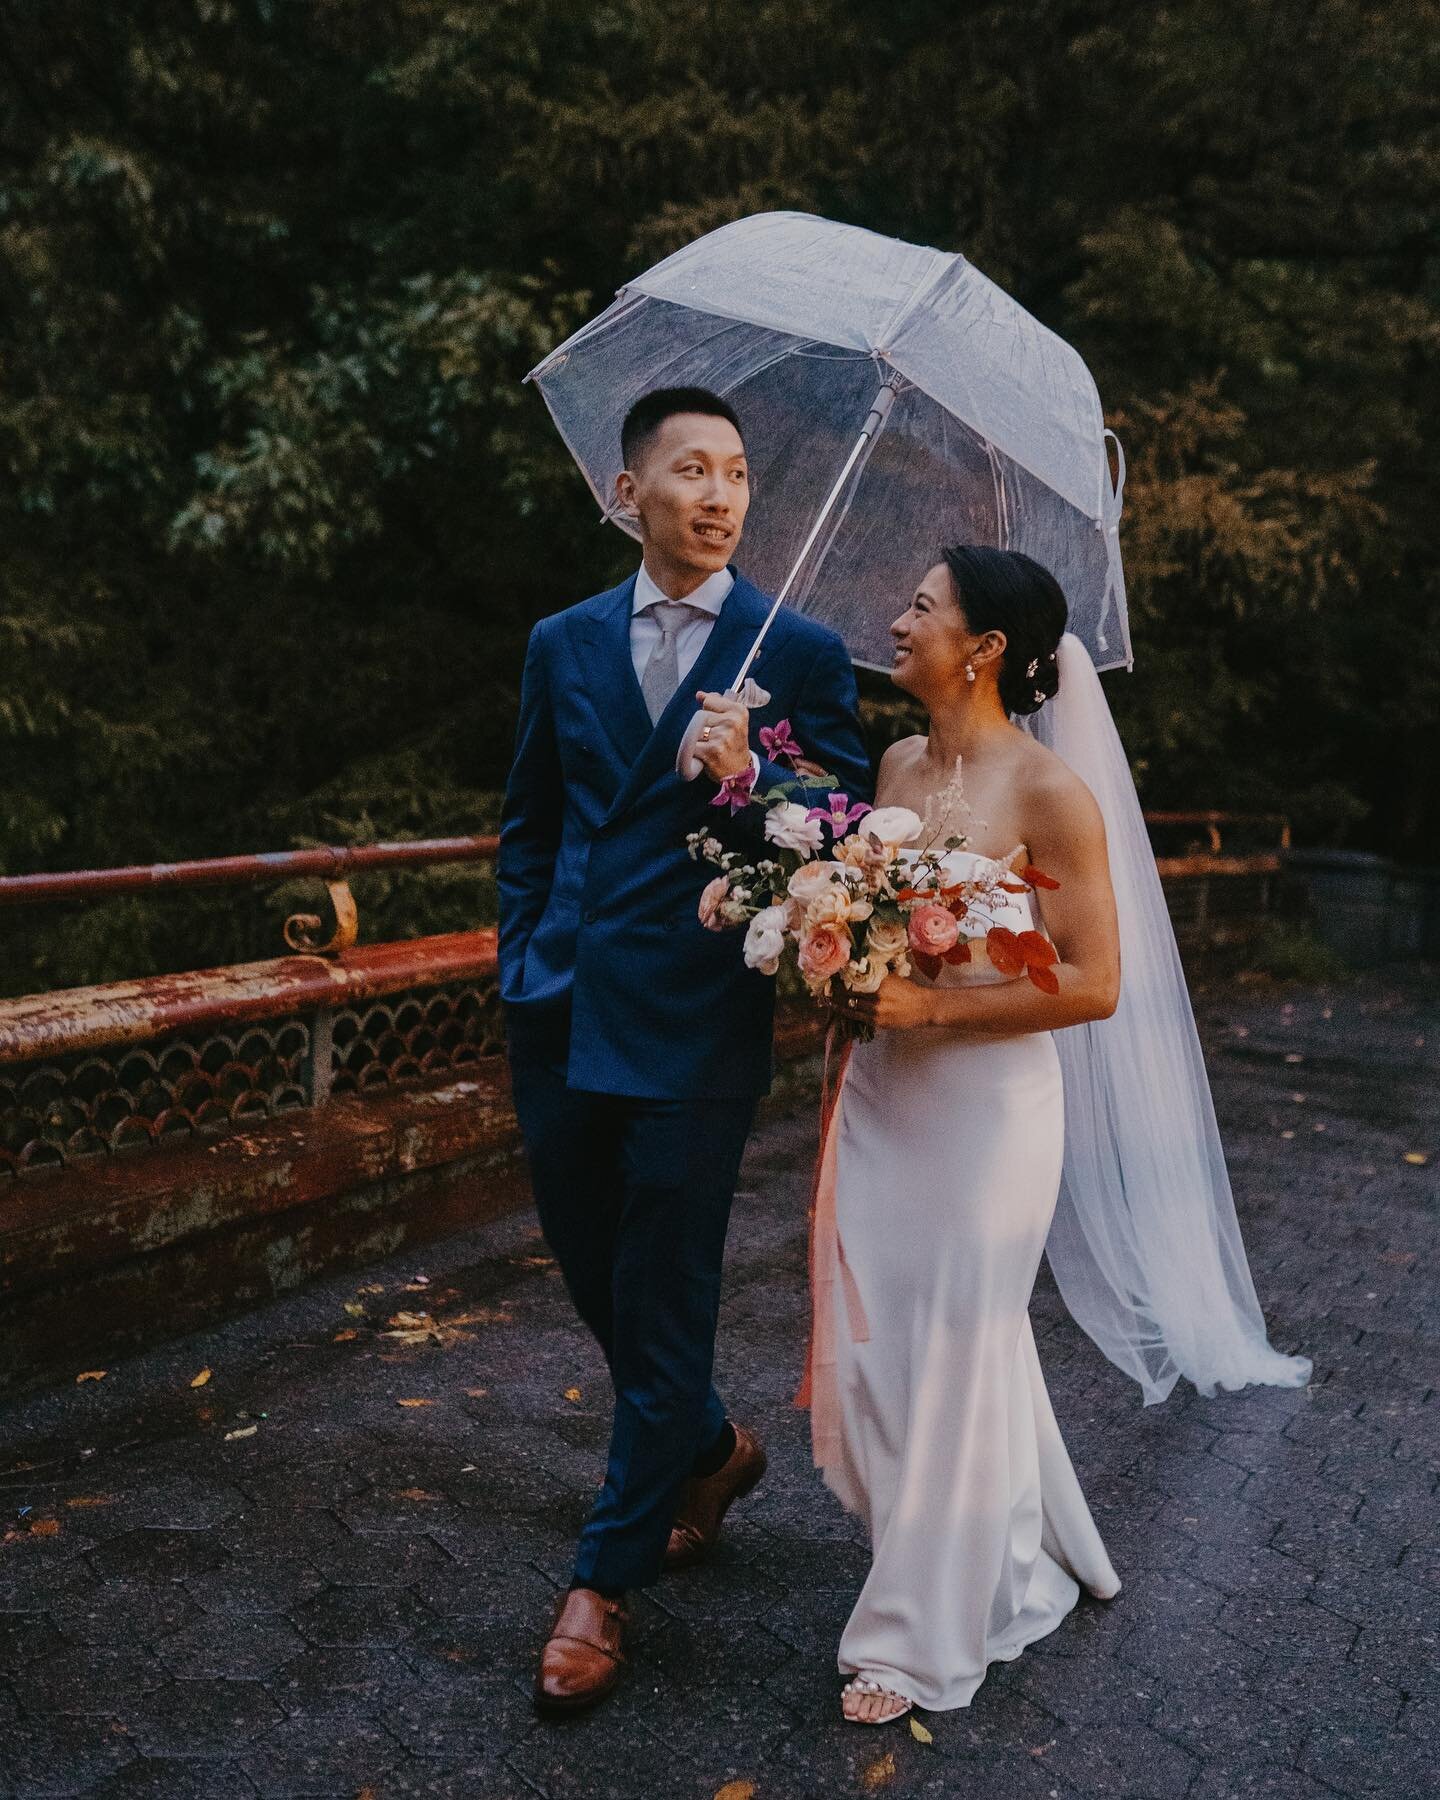 The soft rain added so much charm to this romantic day 🤍

Planning + Design | @wildheightsevents 
Florals | @aprilfloraldesign 
Photographer | @carole_cohen_photography 
Venue | @purslaneattheboathouse 
Beauty | @akiyo_hairandmakeup